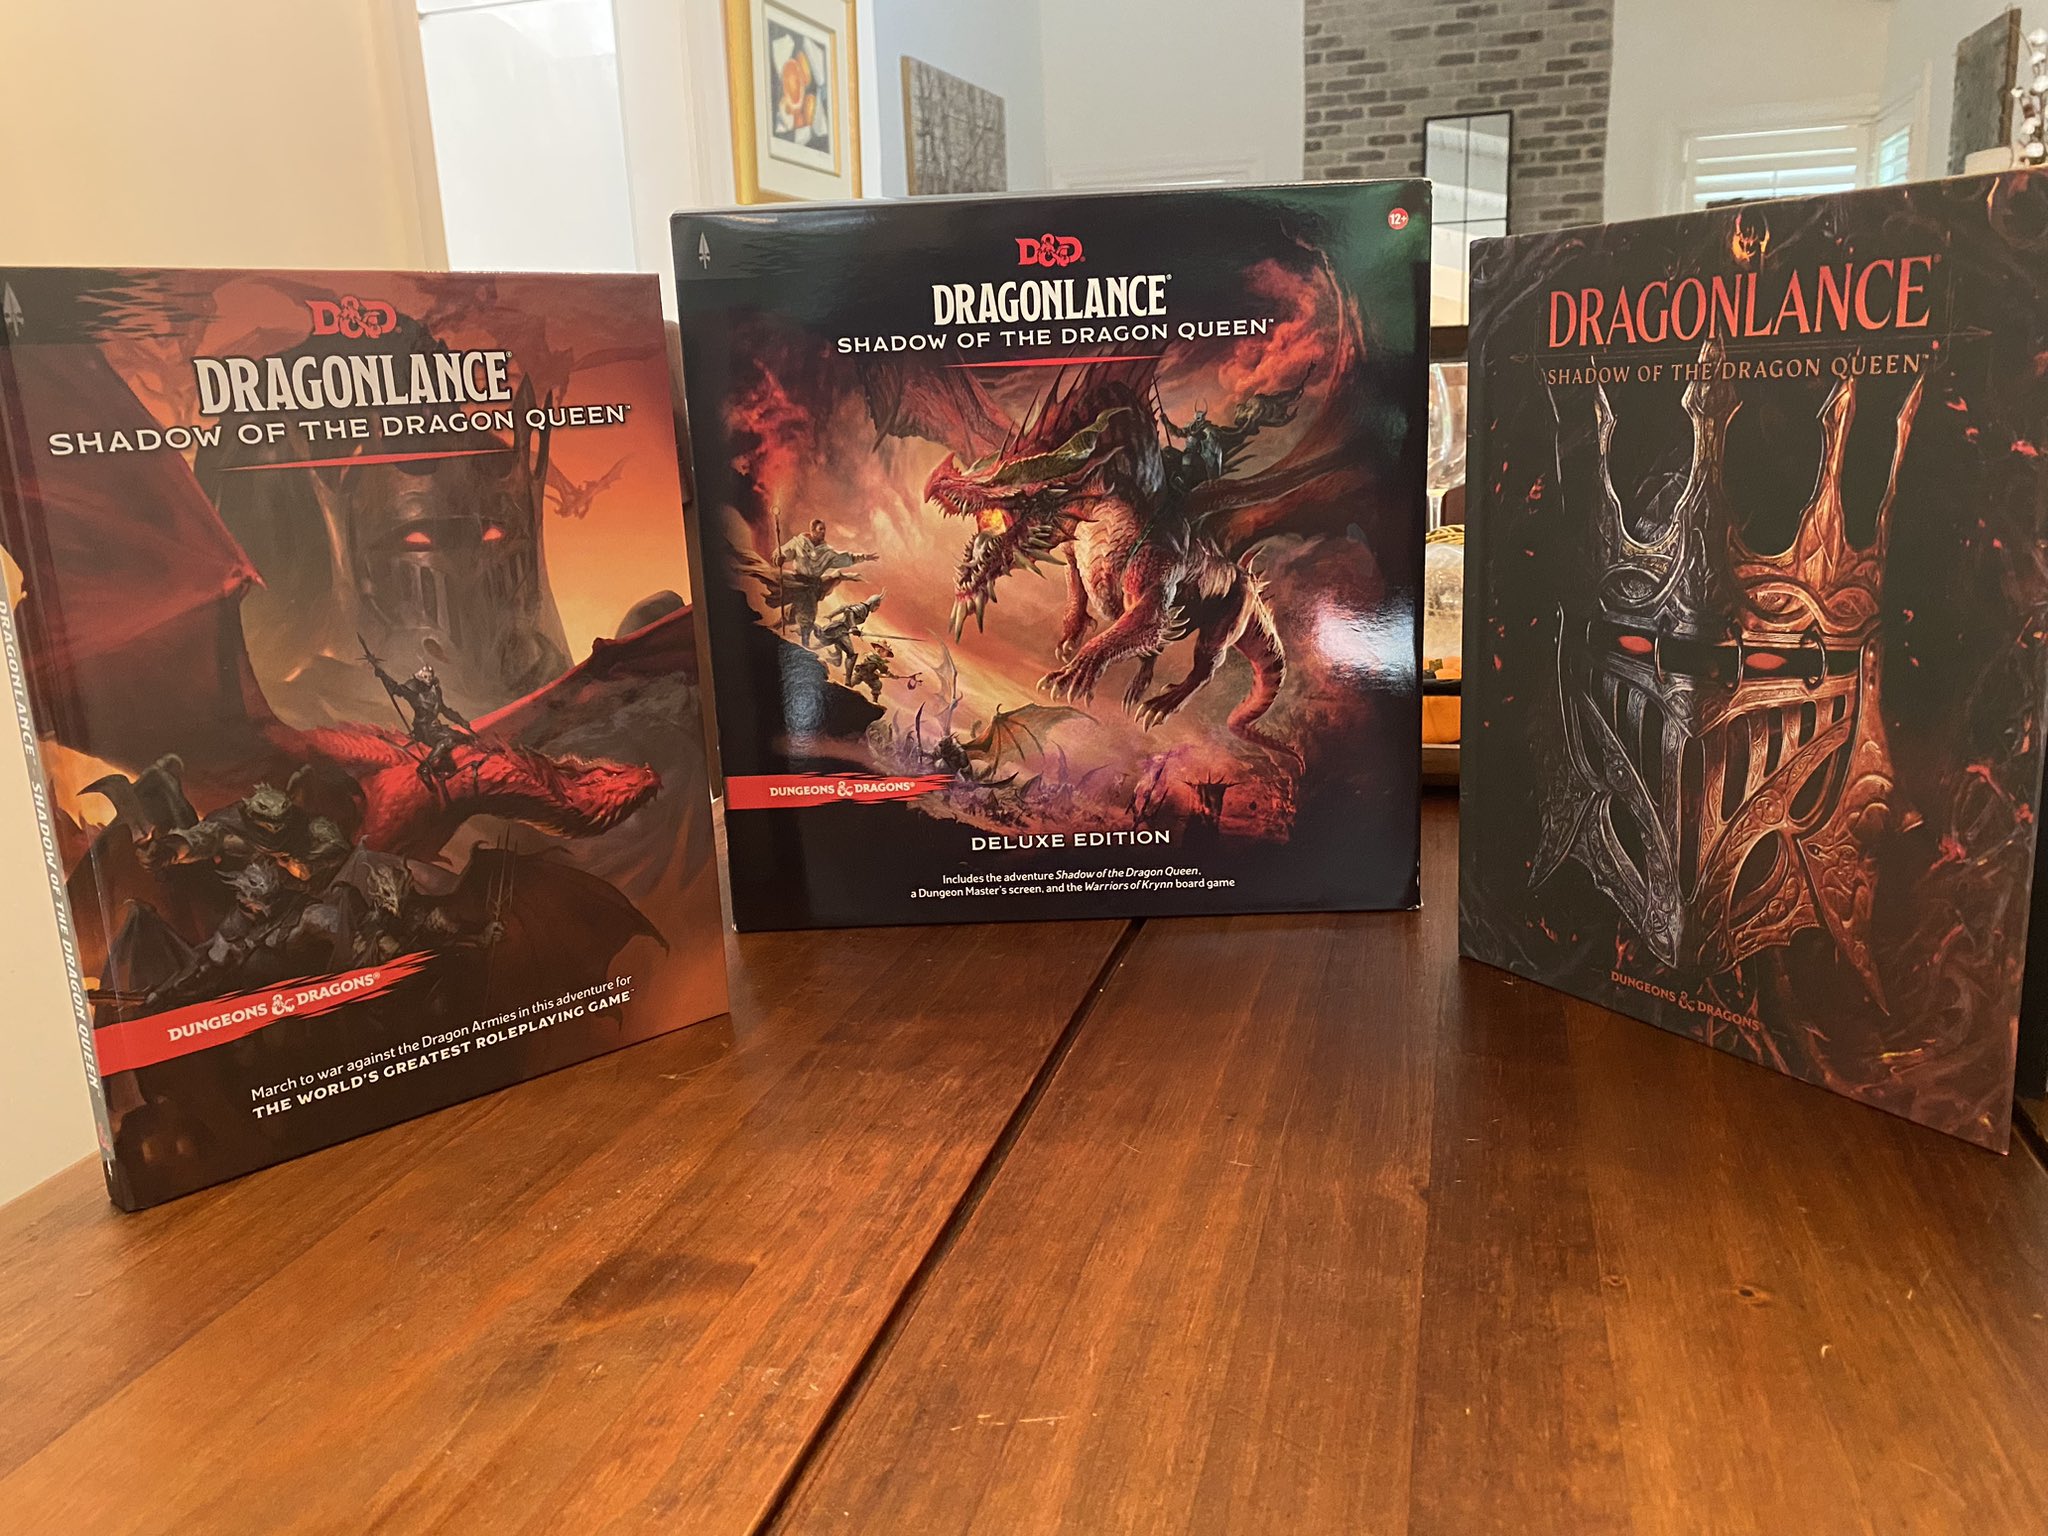 NewbieDM Review: Dragonlance Shadow of the Dragon Queen adventure